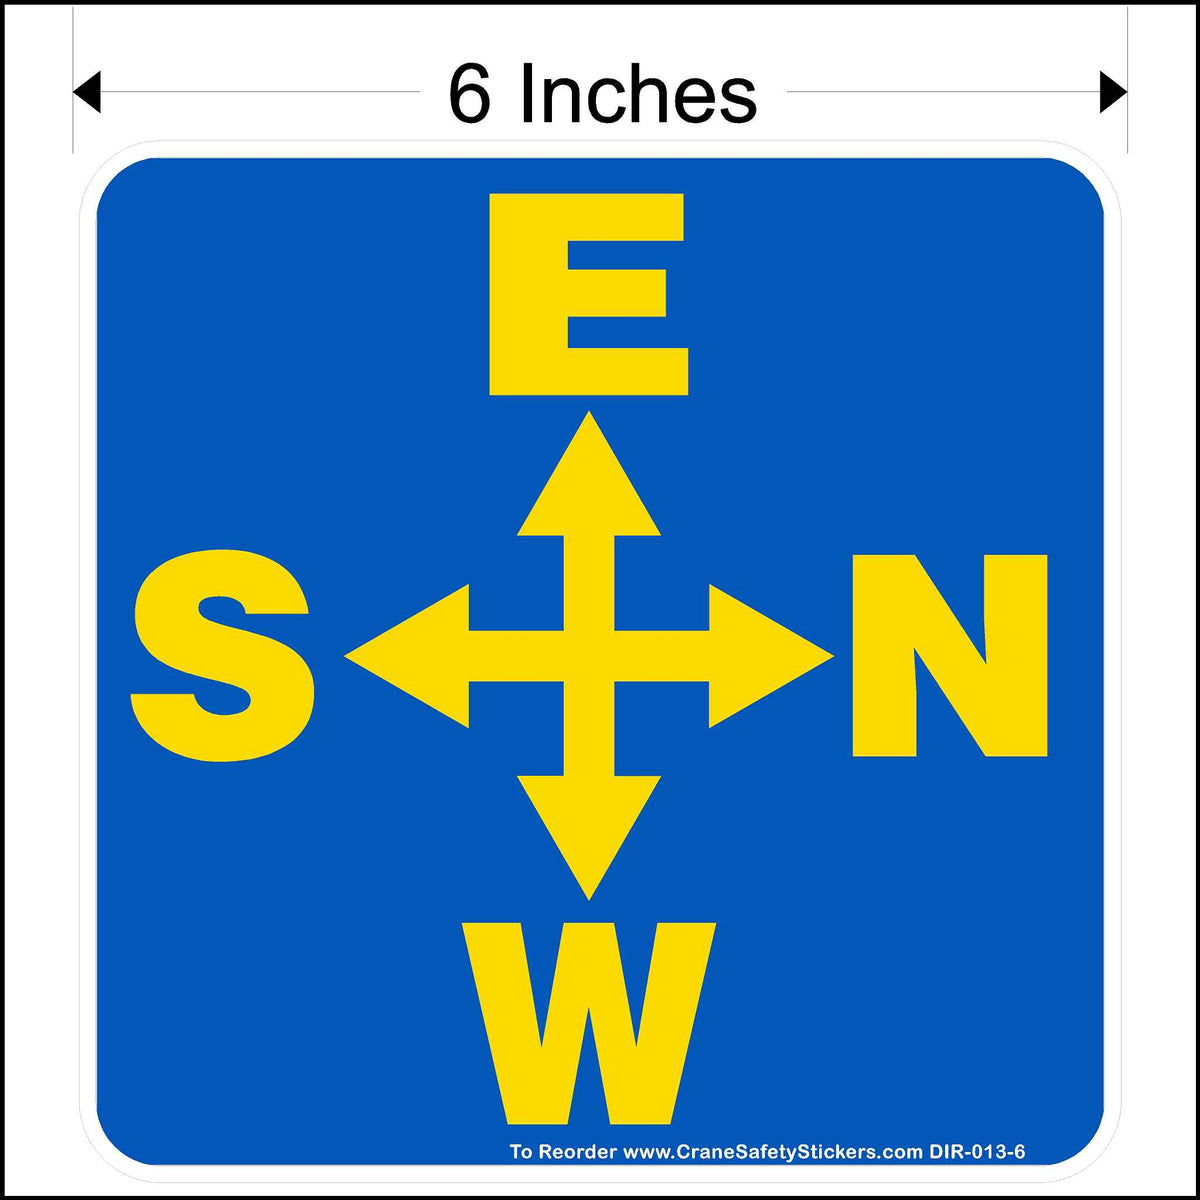 Overhead crane directional decal printed in blue and yellow measuring 6 inches square.